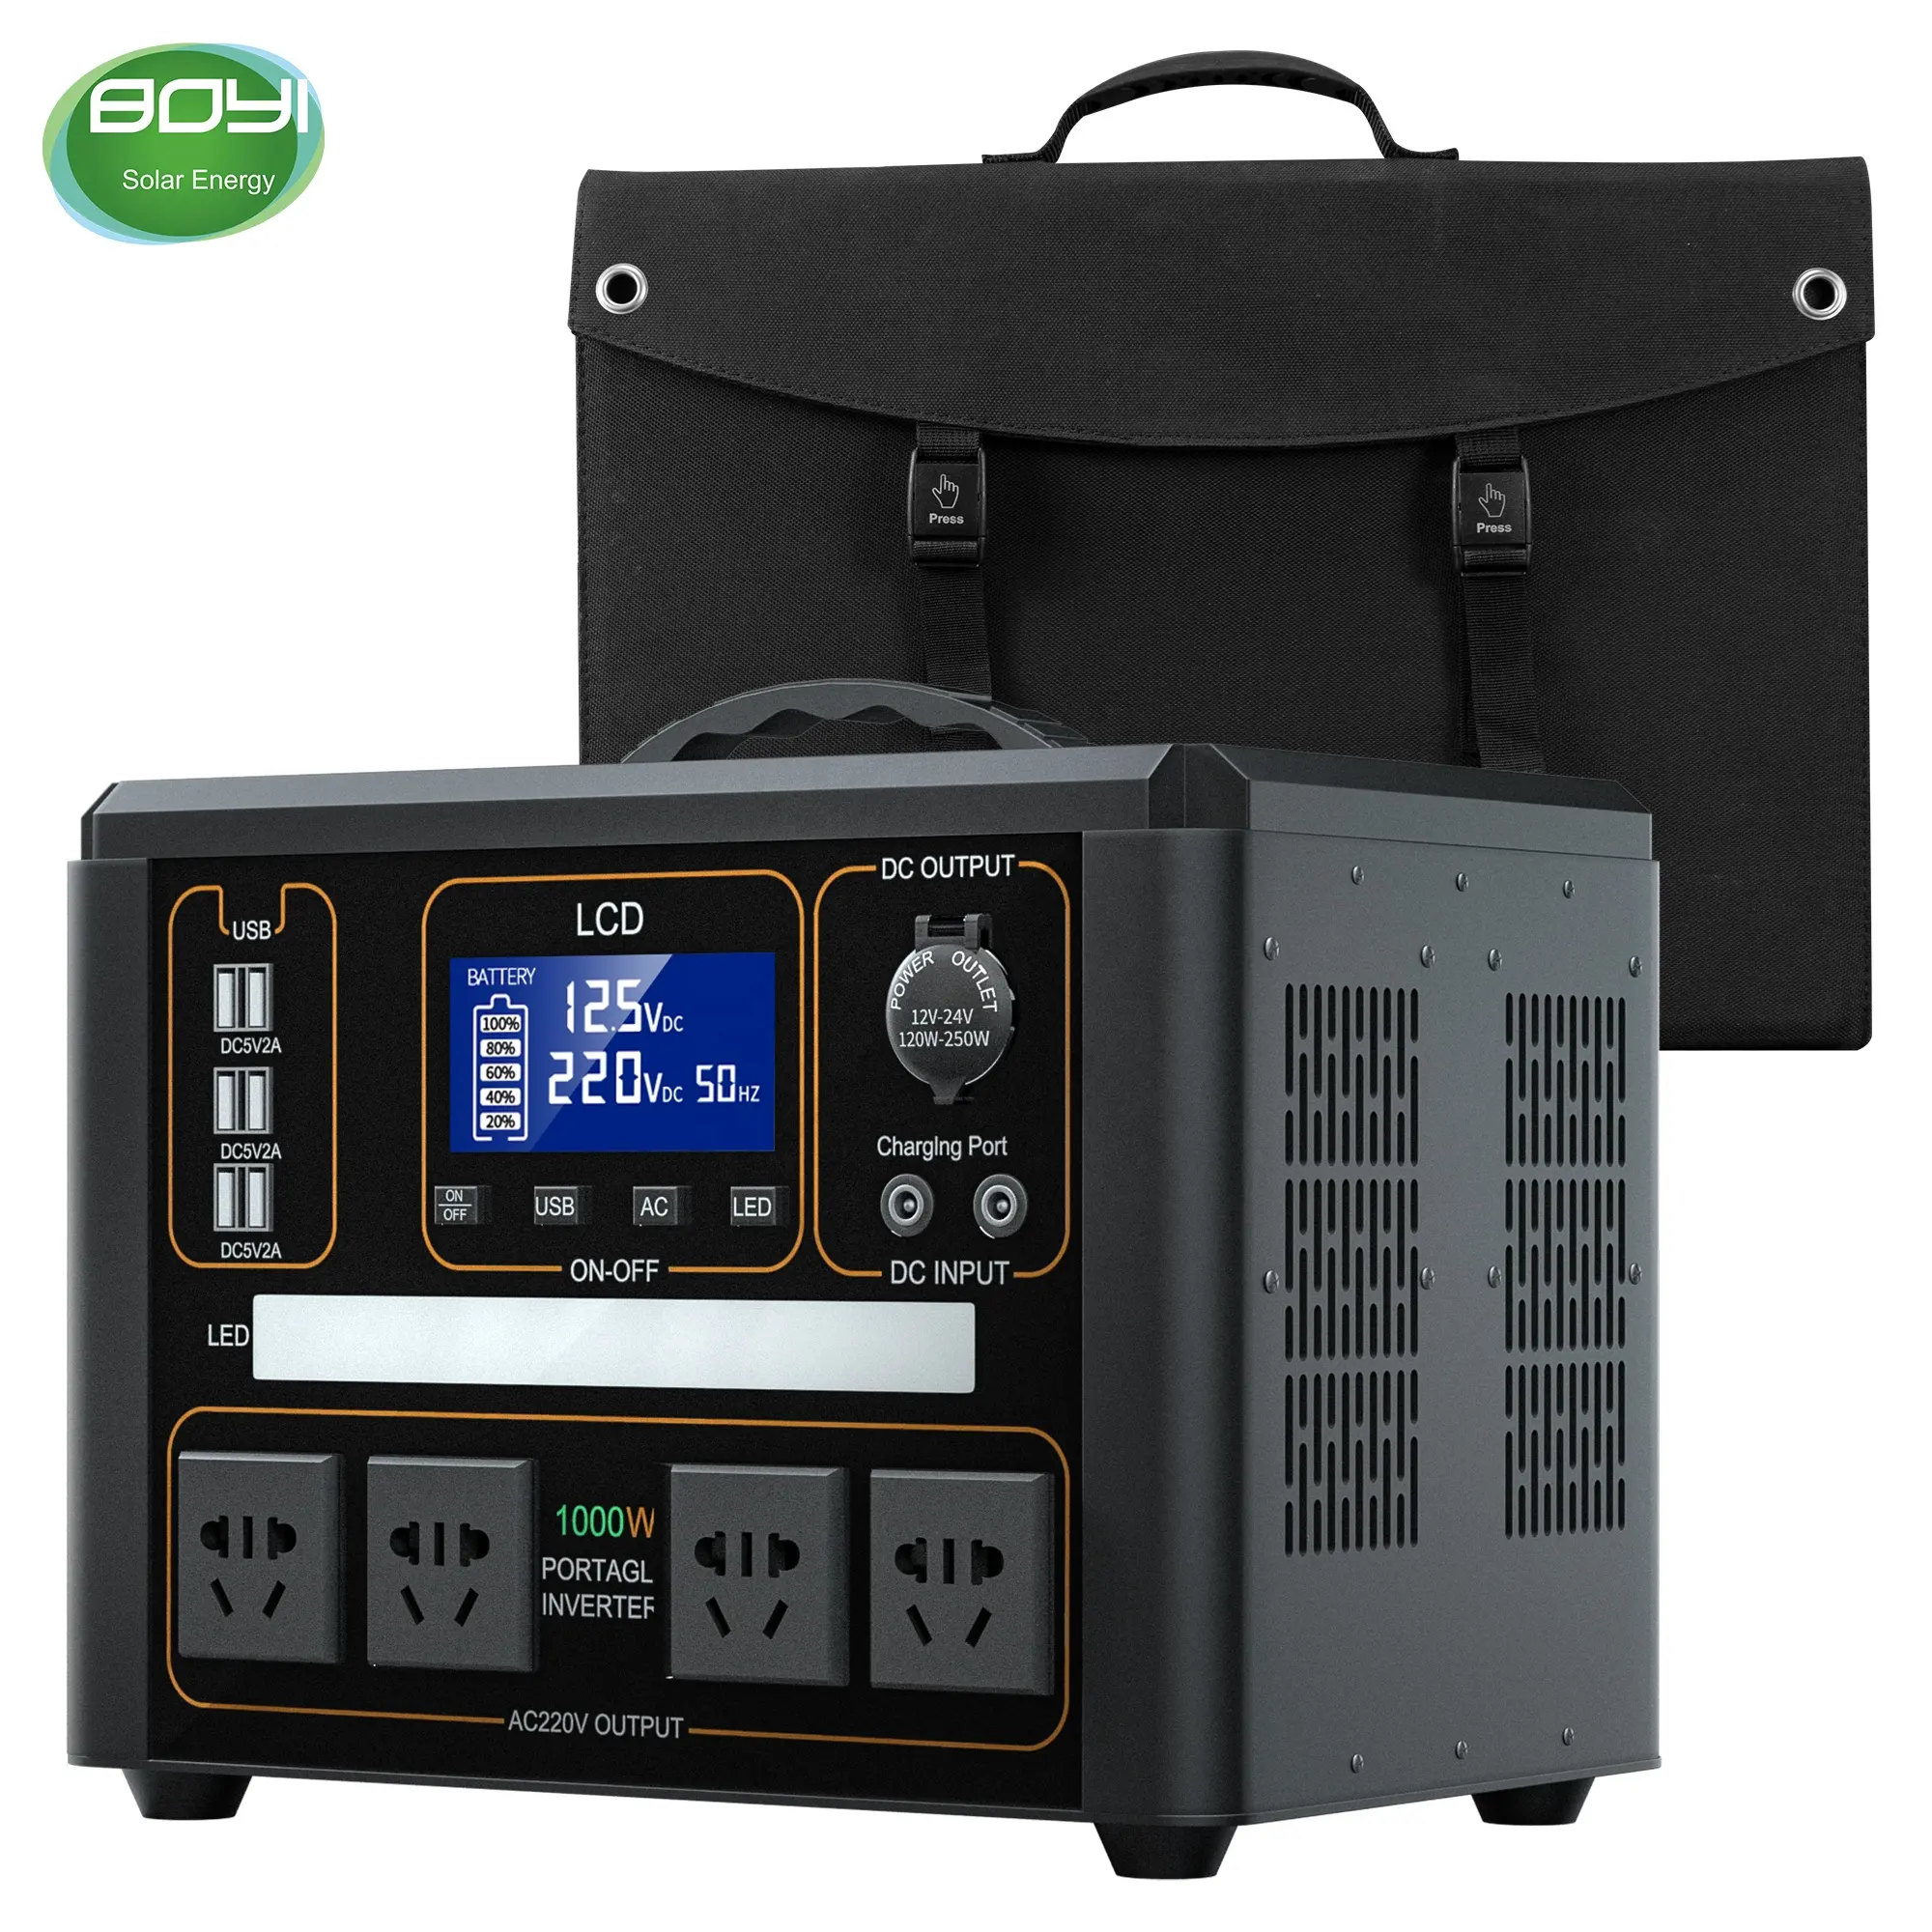 Hot sale outdoor camping energy saving electric generator portable power inverter